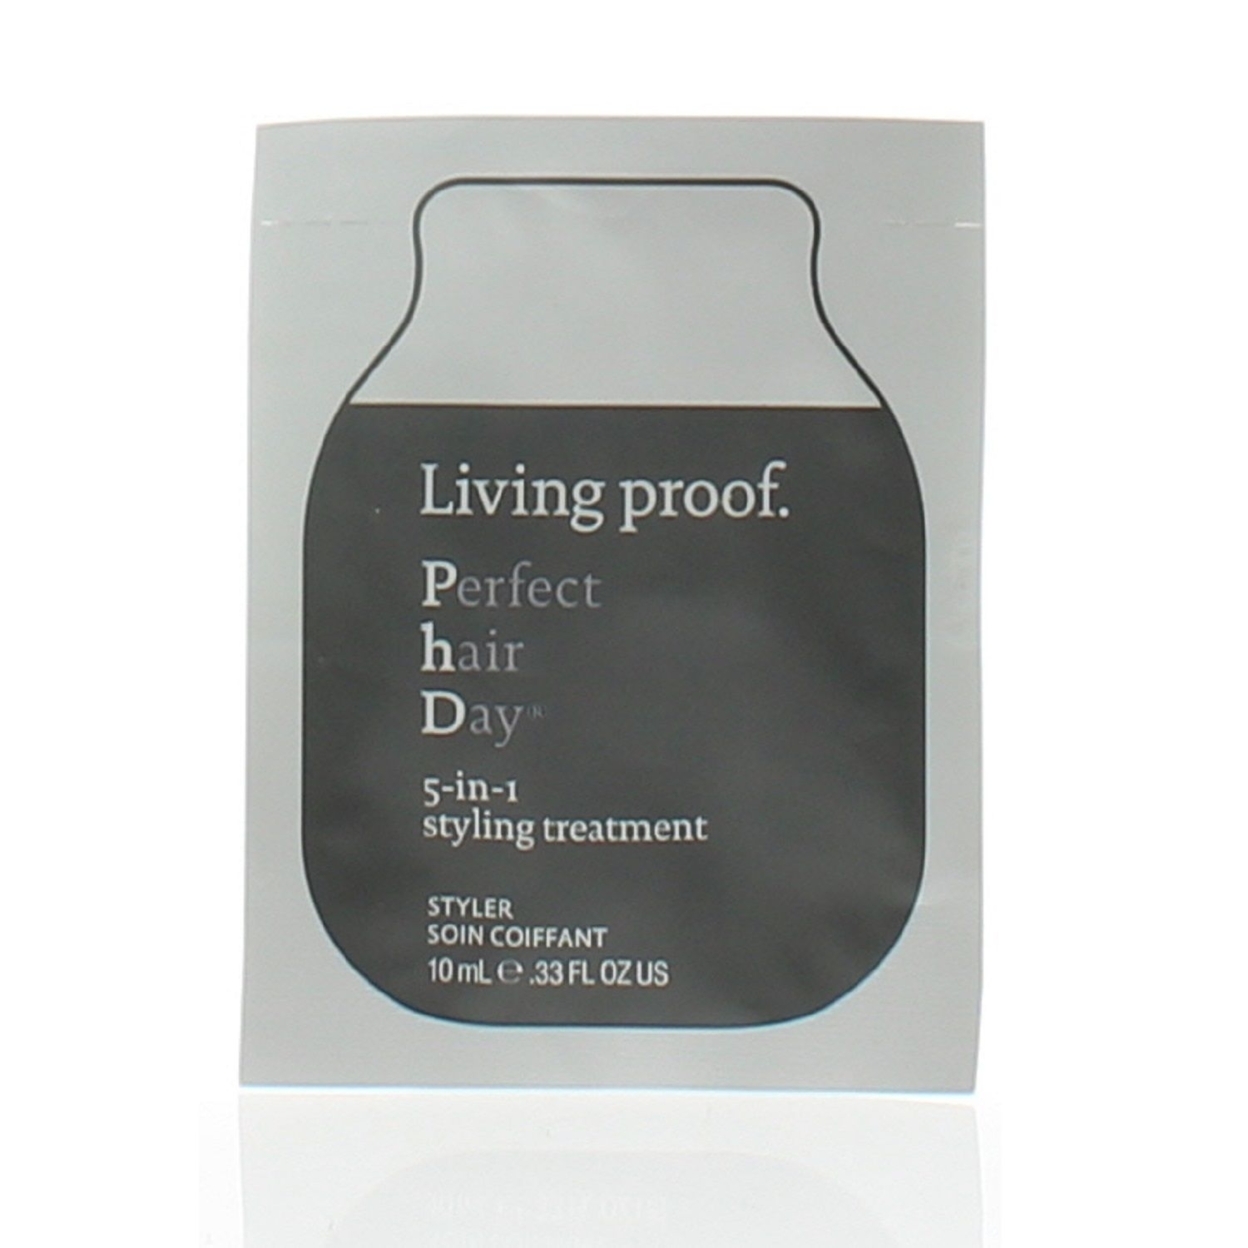 Living Proof Perfect Hair Day (PhD) 5-In-1 Styling Treatment Pouch 0.33oz/10ml